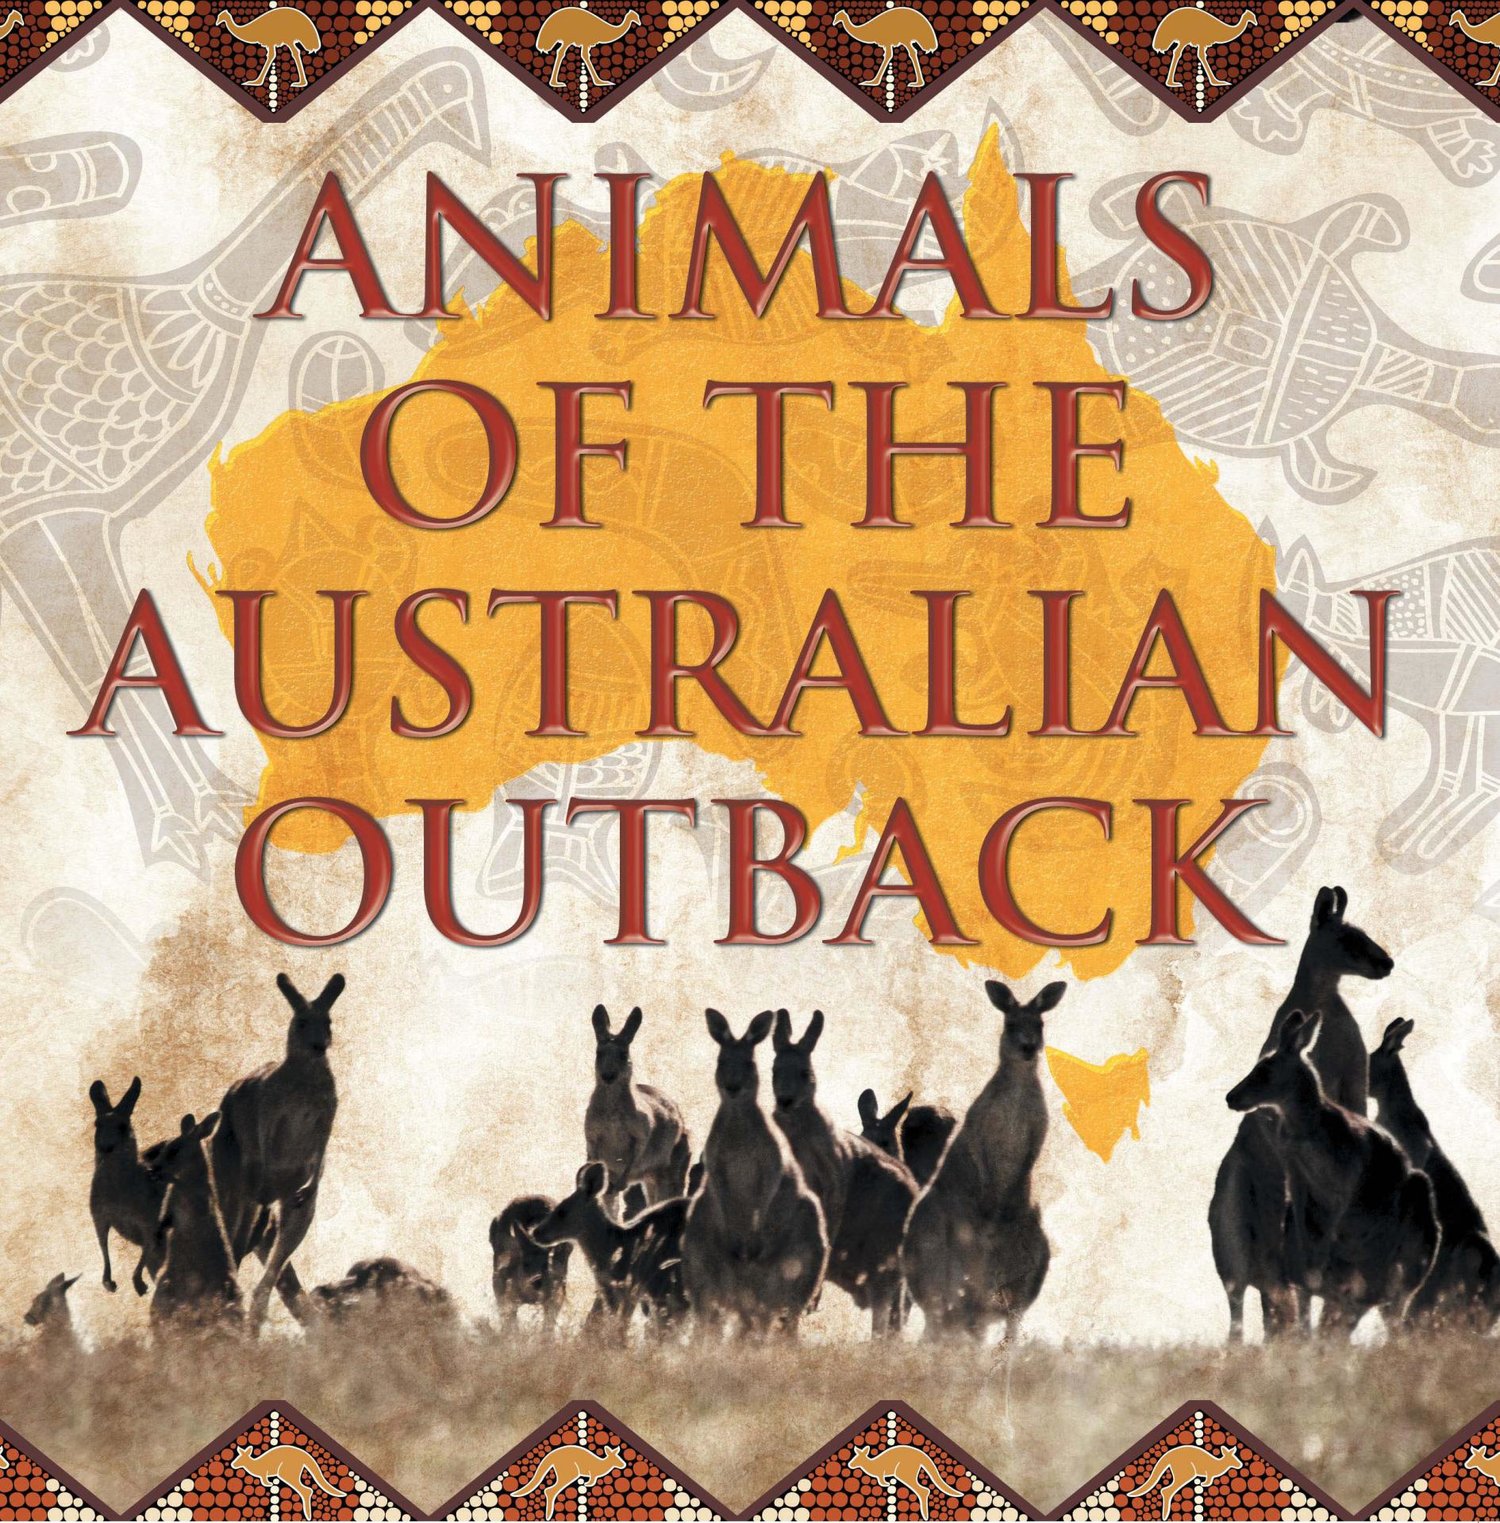 Книга animals animals. Книга animals. Outback Australia animals. The animal book. Animal book Cover for Kids.